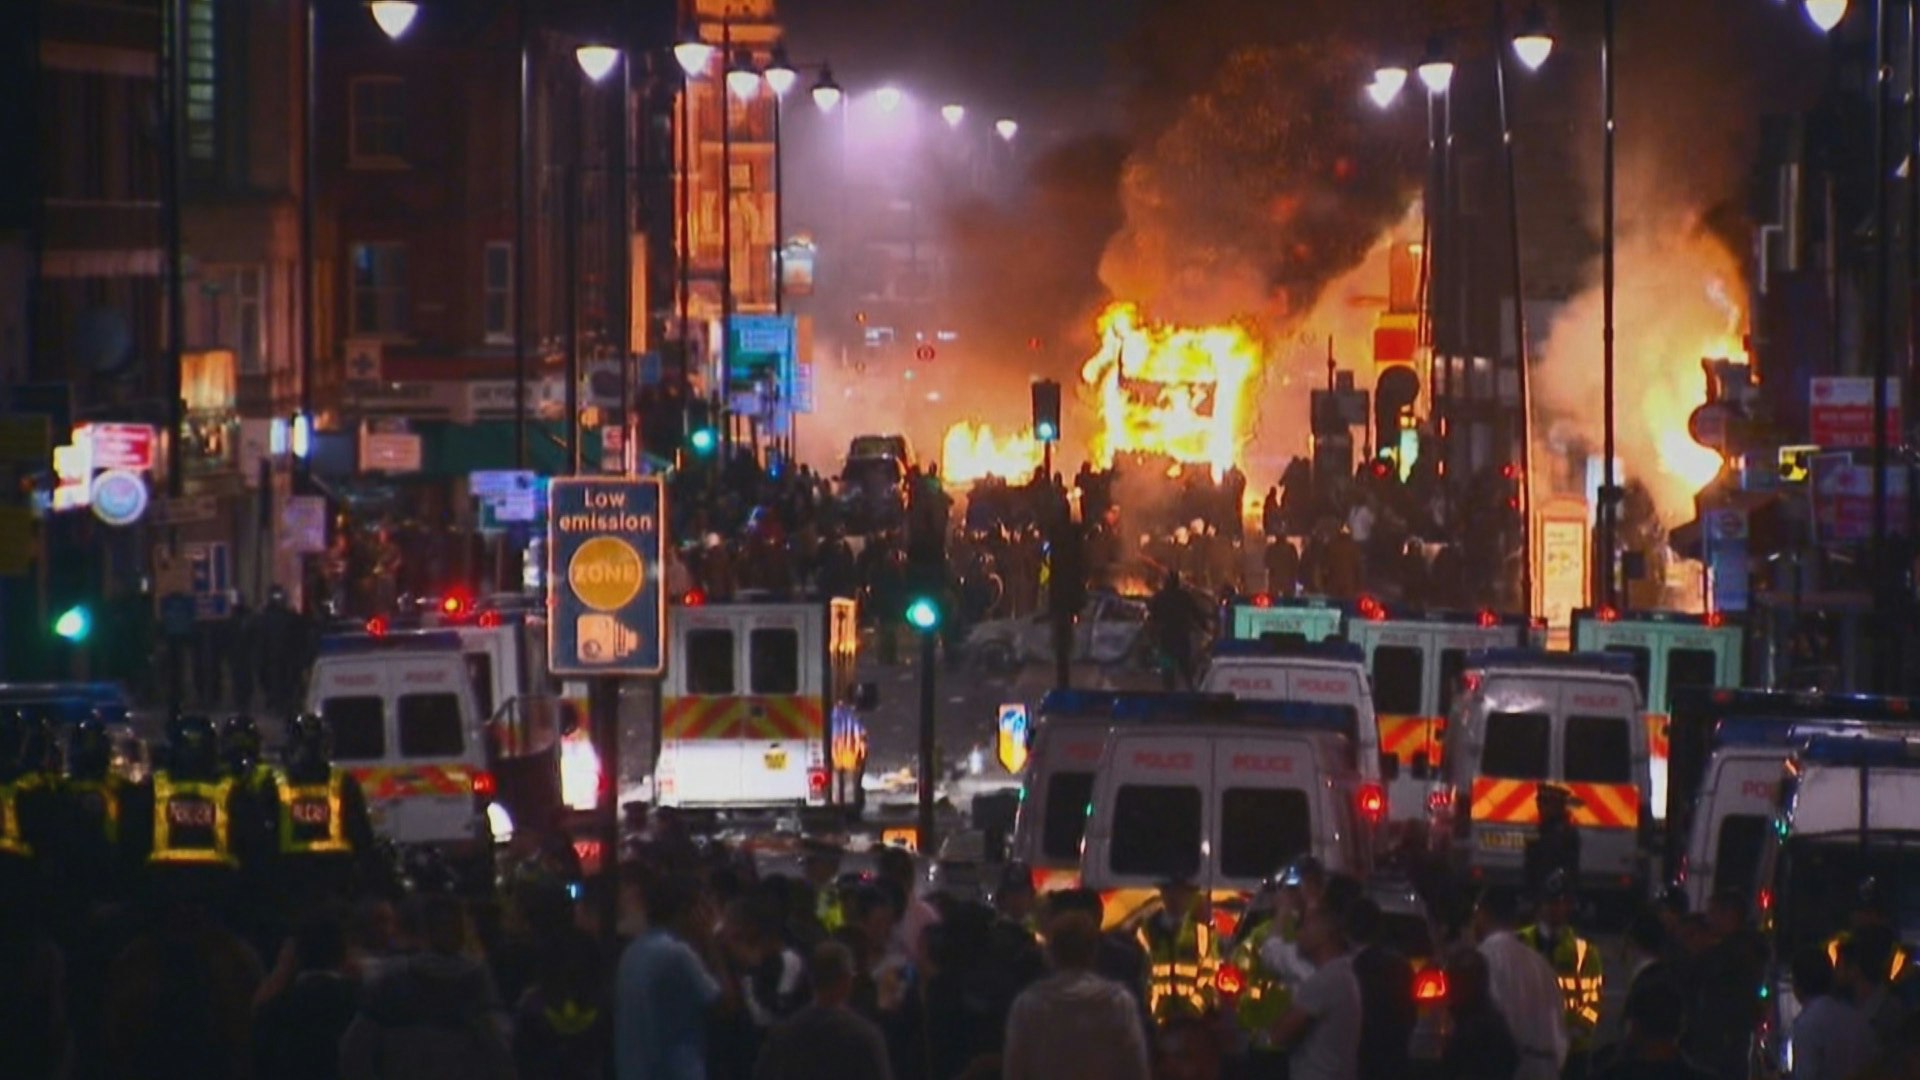 Five years after Mark Duggan’s death, the anger that sparked the London riots is still burning